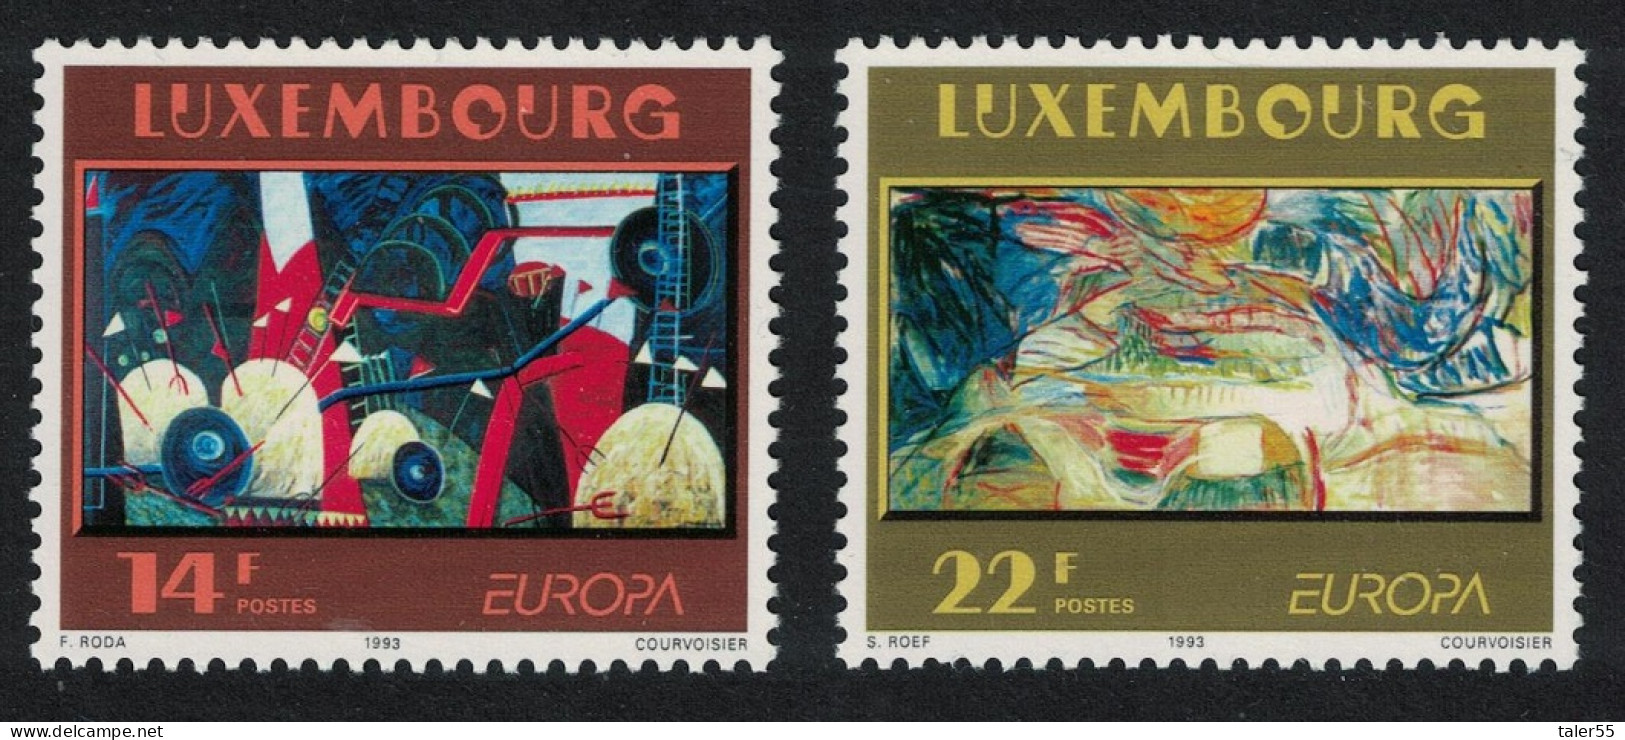 Luxembourg Europa Contemporary Art 2v 1993 MNH SG#1356-1357 MI#1318-1319 - Unused Stamps